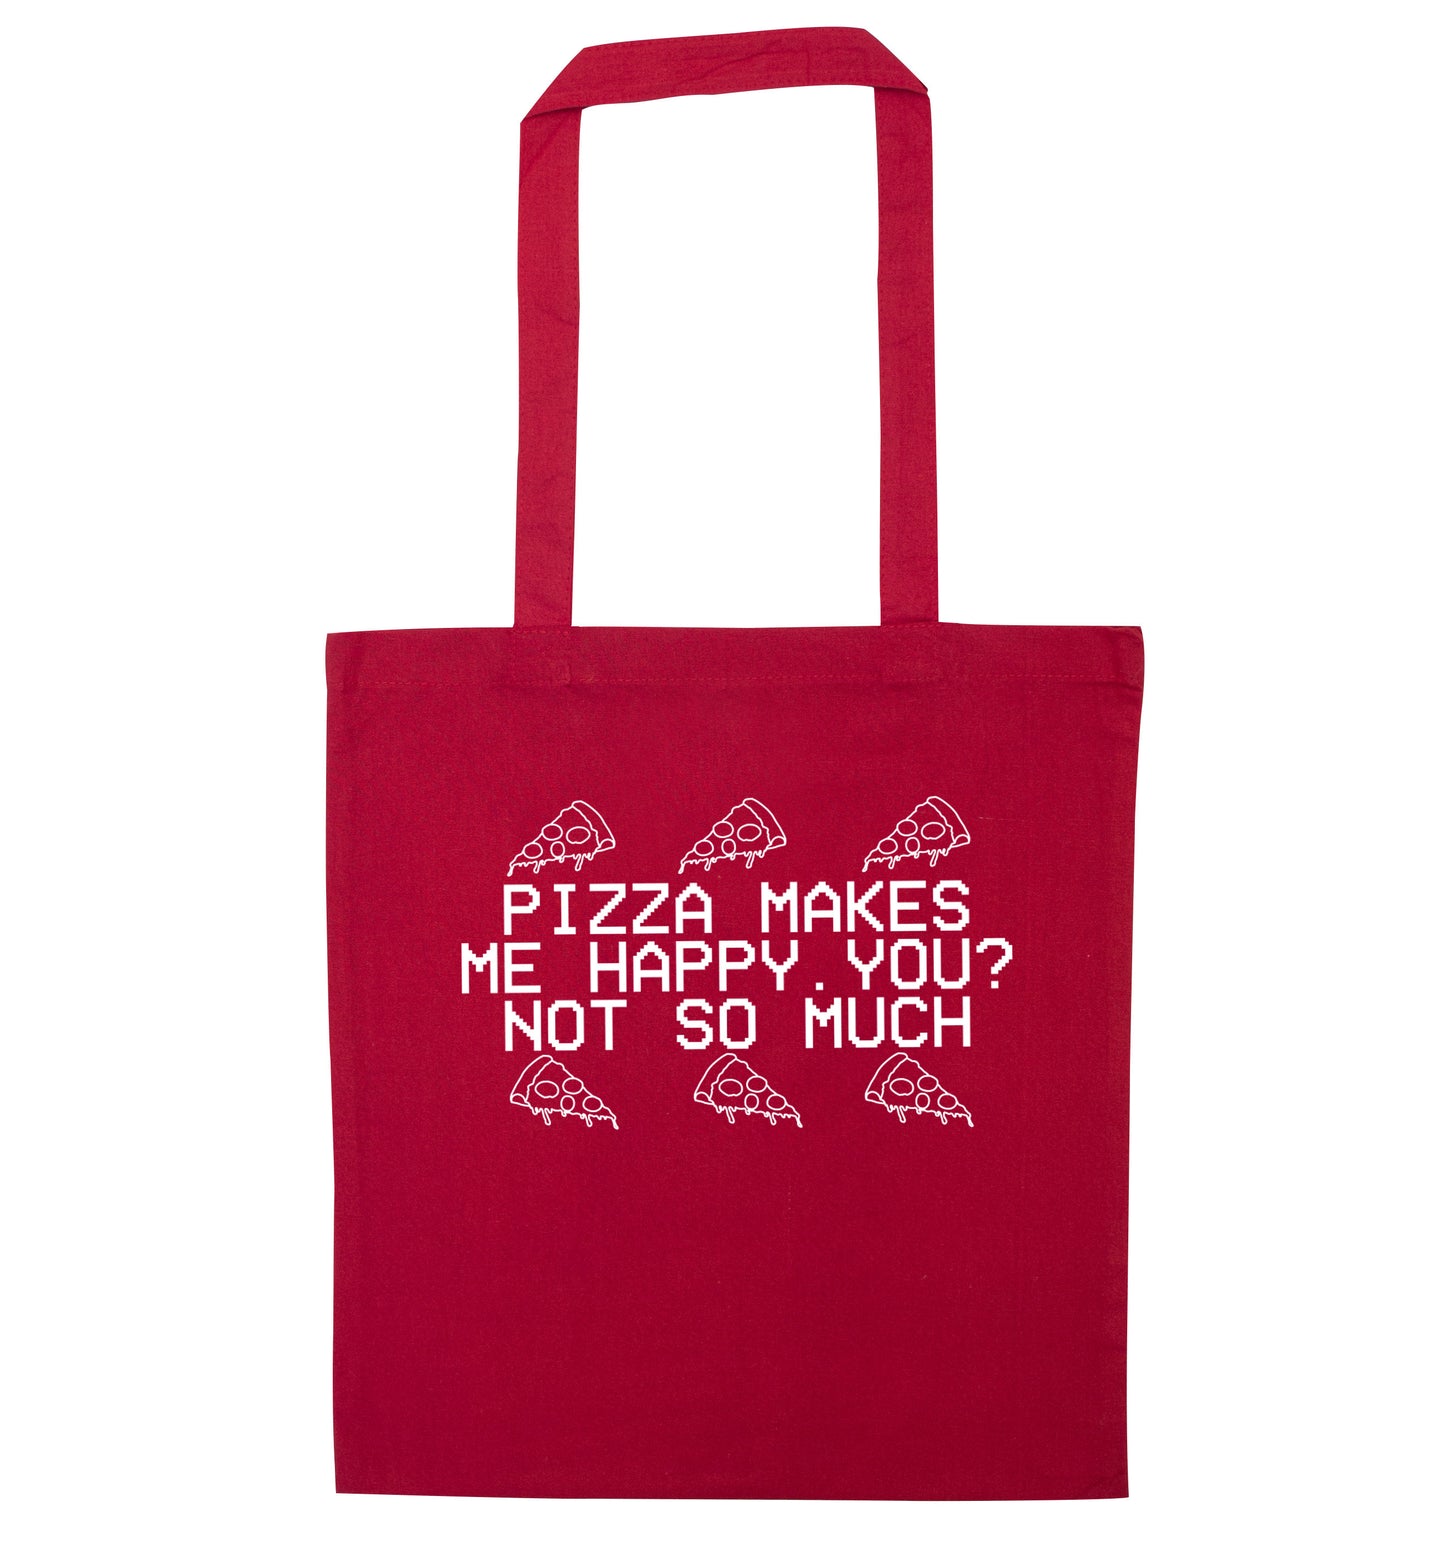 Pizza makes me happy, You? Not so much red tote bag